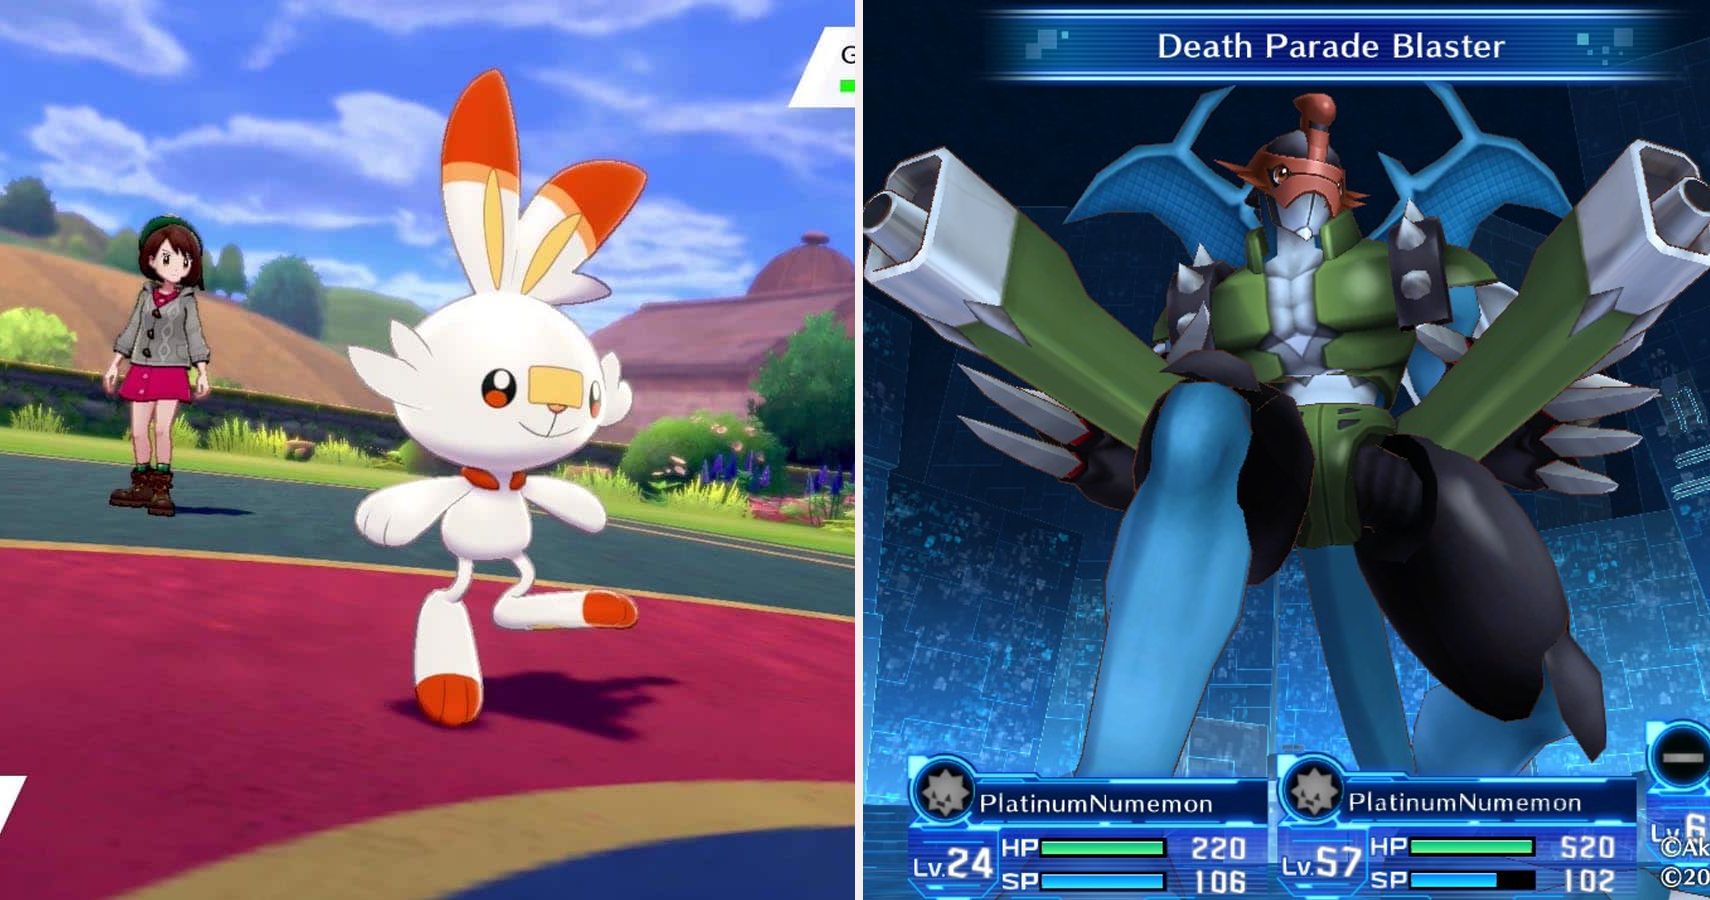 10 Nintendo Switch Games To Play If You Love Pokemon Sword Shield